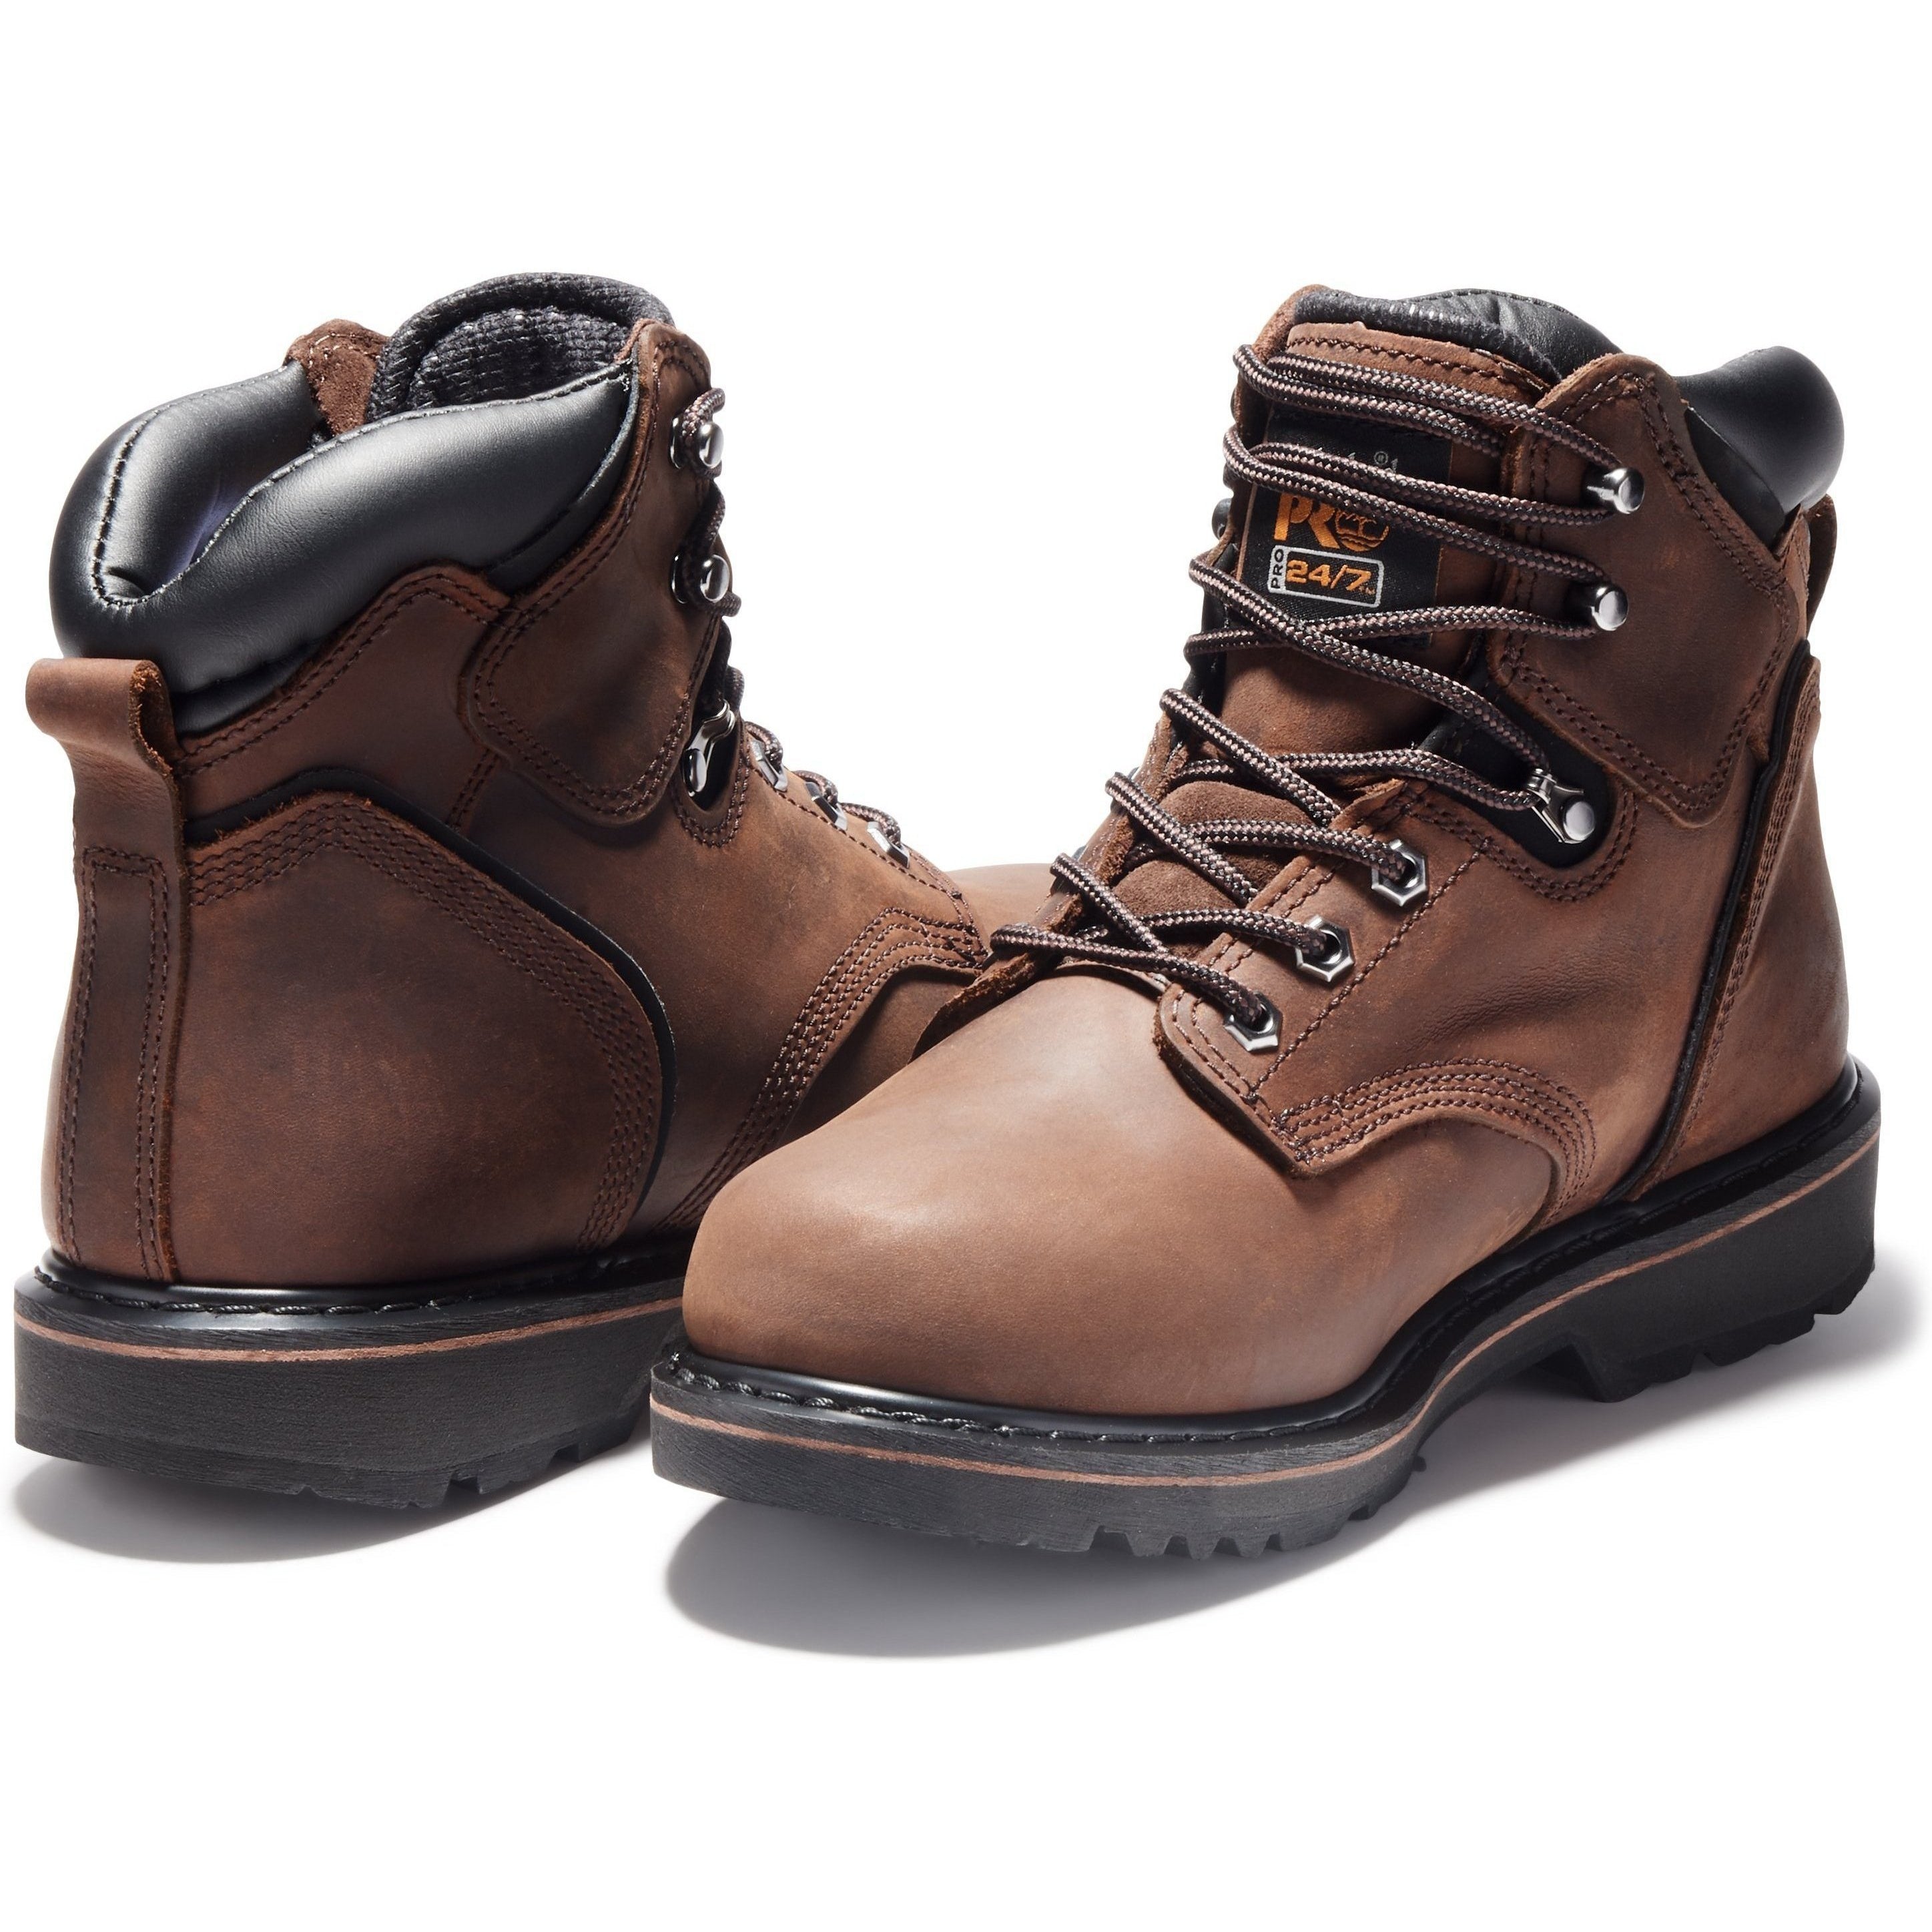 Timberland PRO Men's Pit Boss 6" Soft Toe Work Boots Brown TB033046214  - Overlook Boots